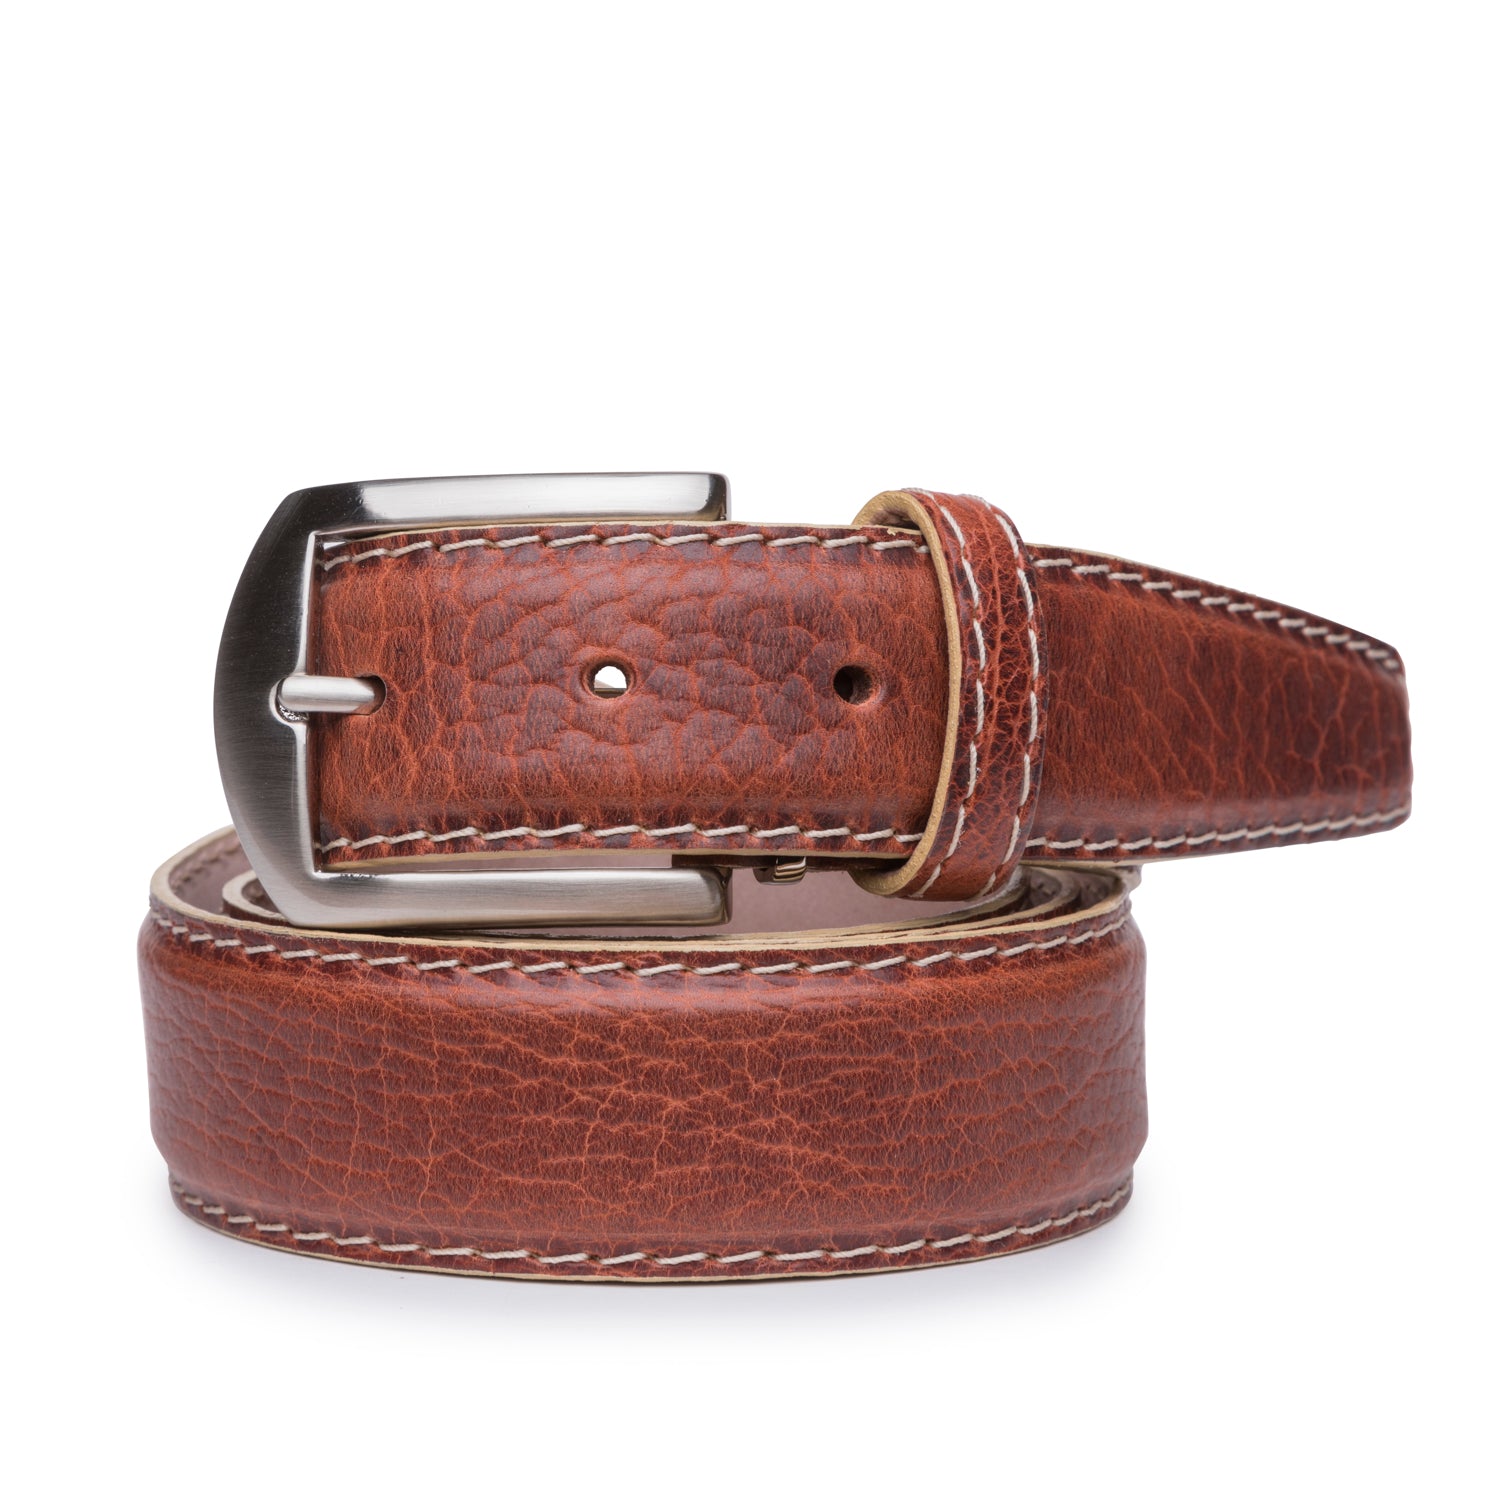 American Bison Belt in Cognac with Beige Stitching by L.E.N. Bespoke